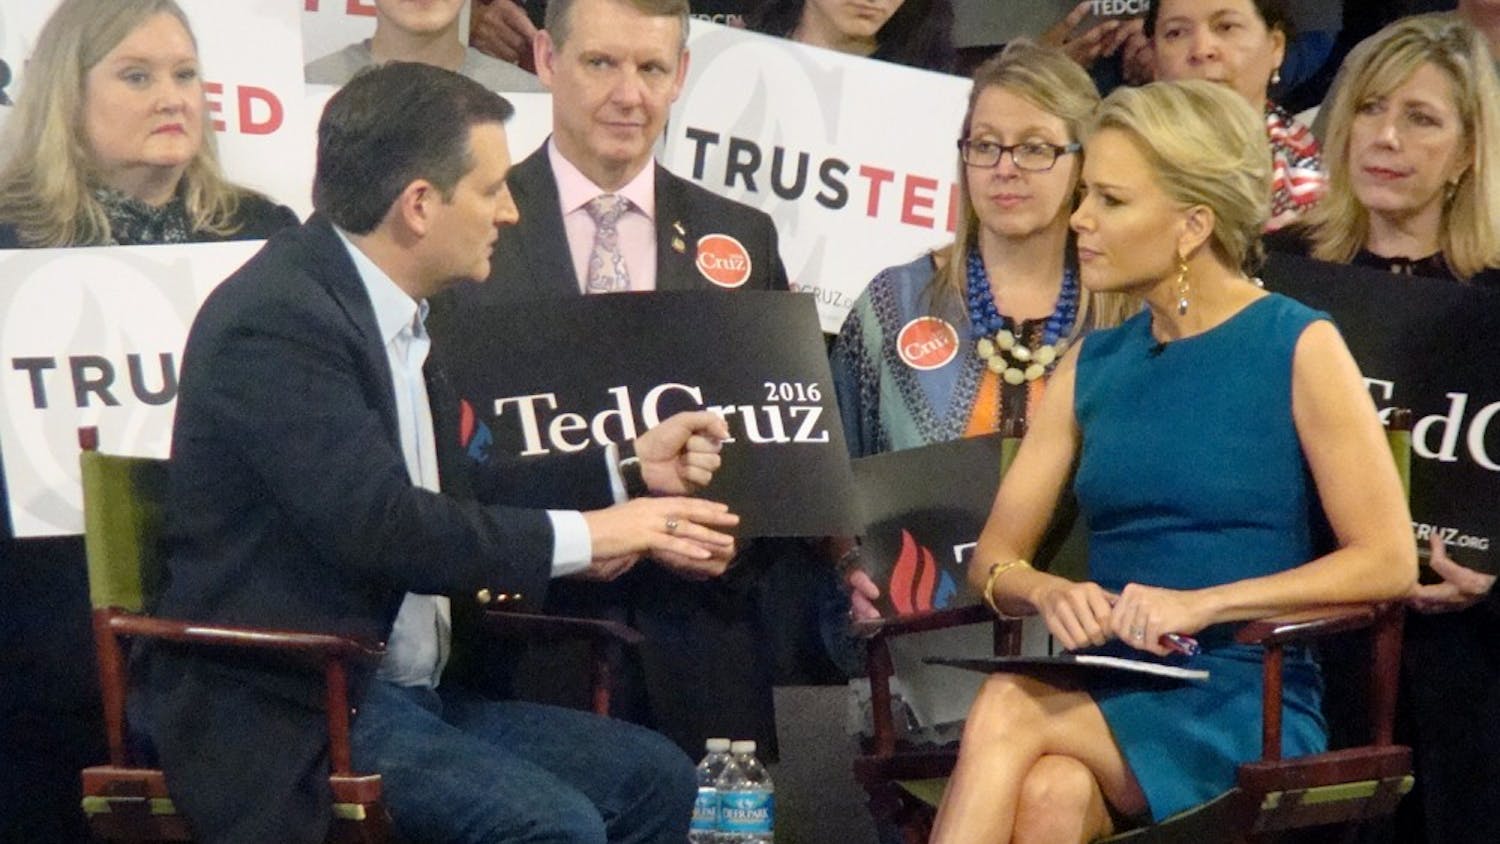 Senater Ted Cruz, presidential candidate, participated in a Q&A session with Megyn Kelly at Calvary Baptist church of Raleigh on Tuesday, March 9th.